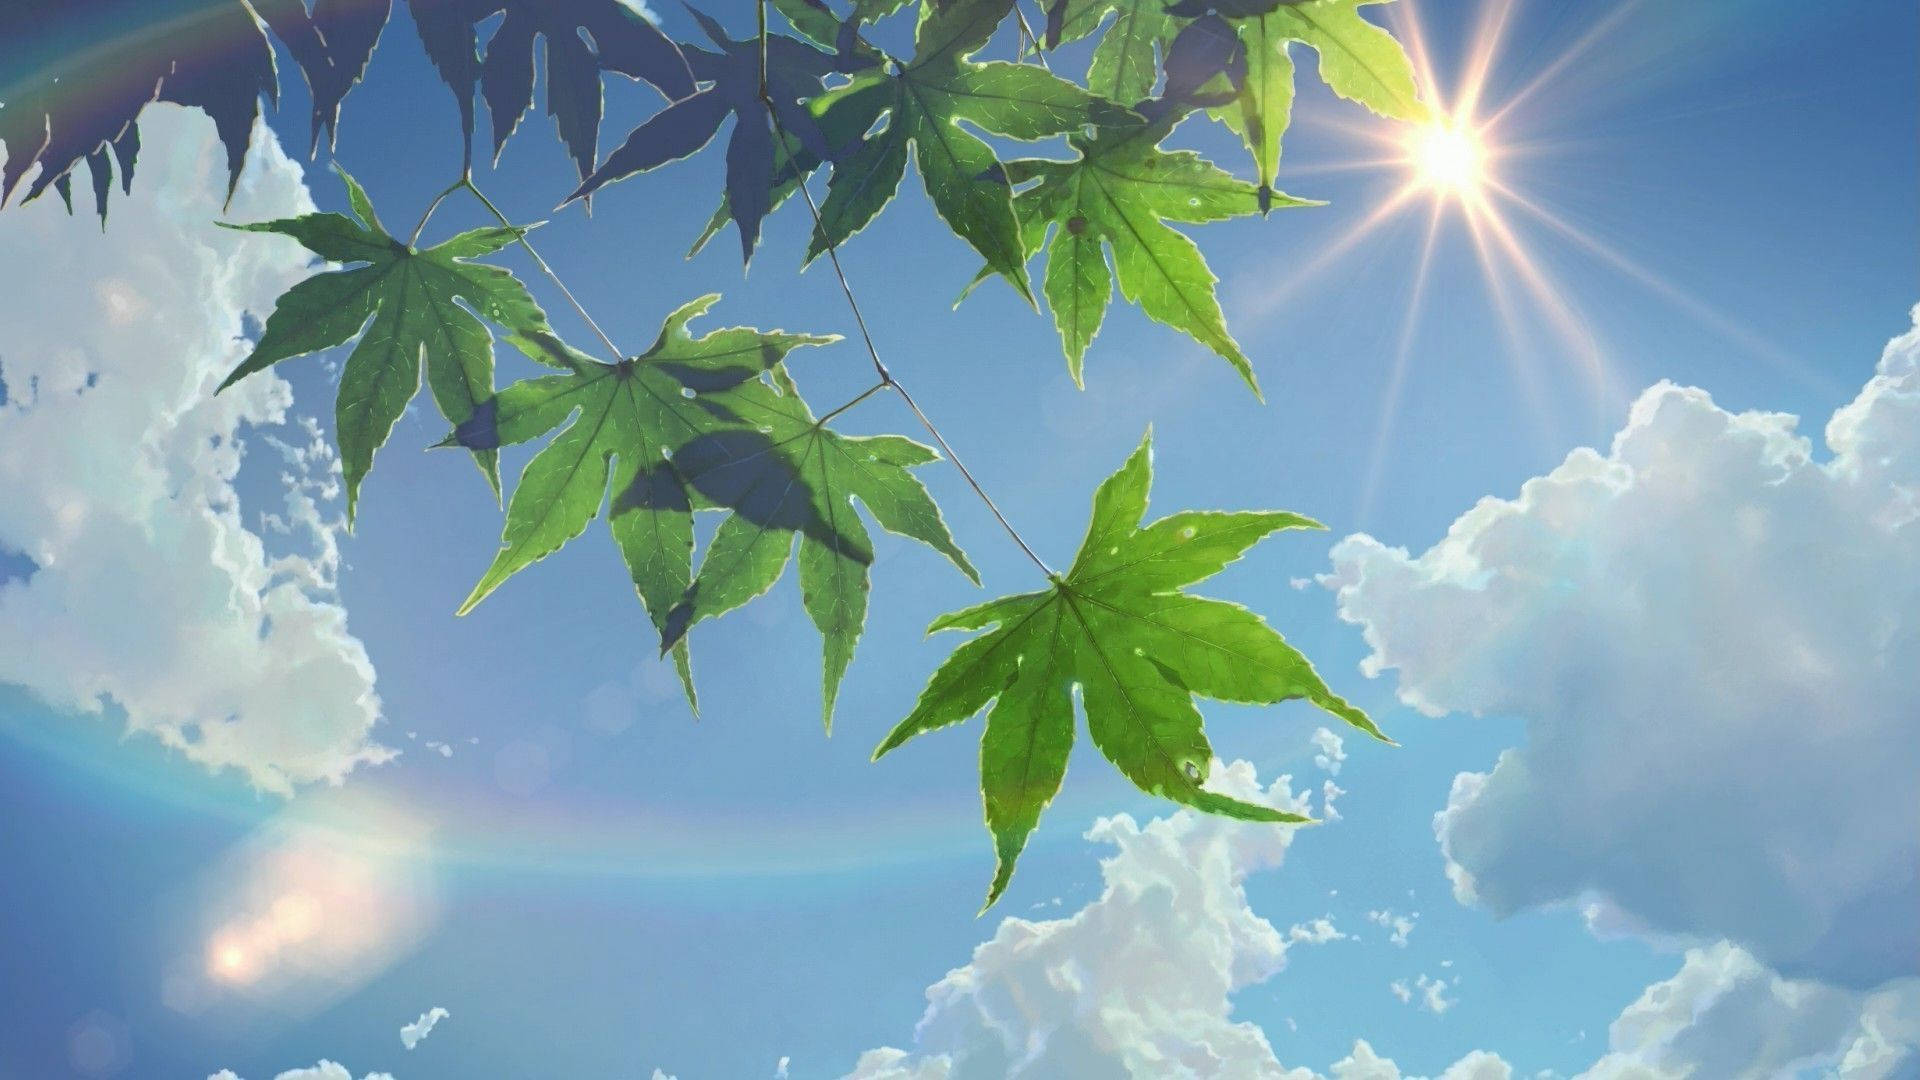 Aesthetic Anime Scenery Of Green Leaves Background